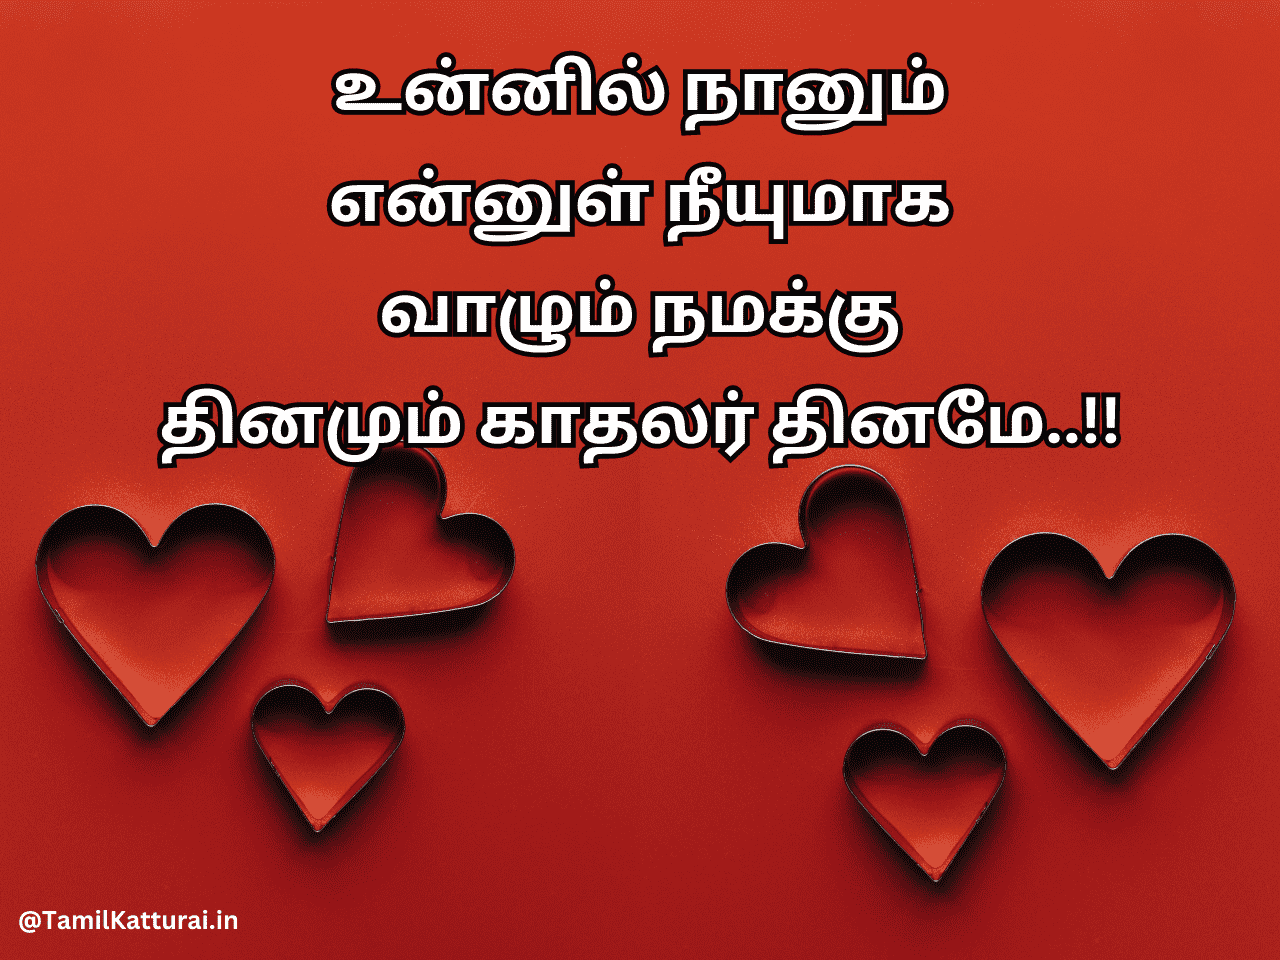 Valentines Day Wishes in Tamil